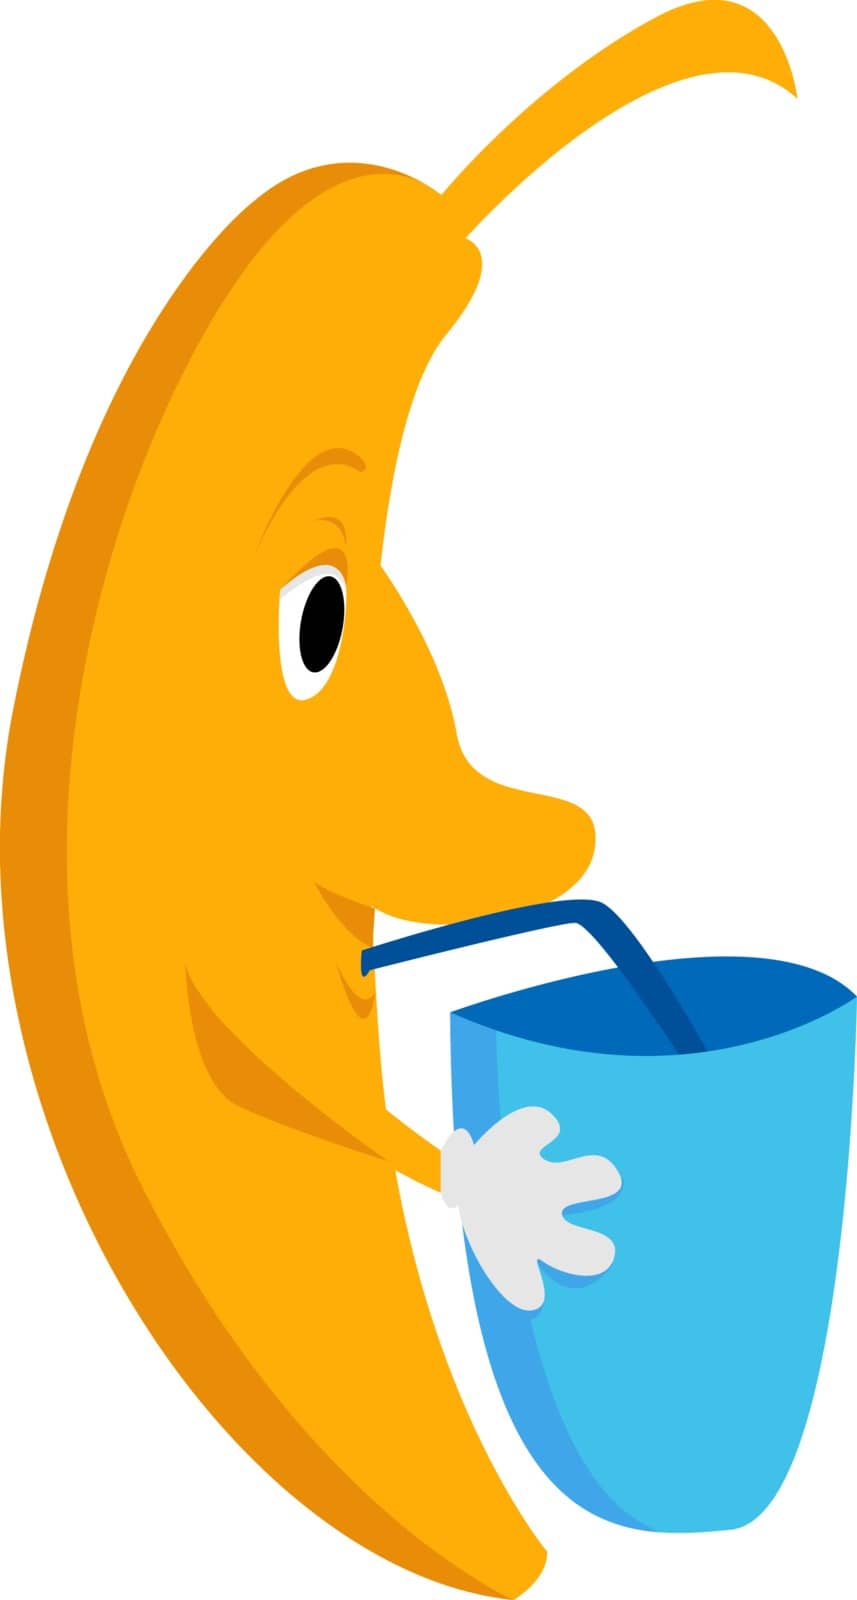 Banana with water, illustration, vector on white background. by Morphart